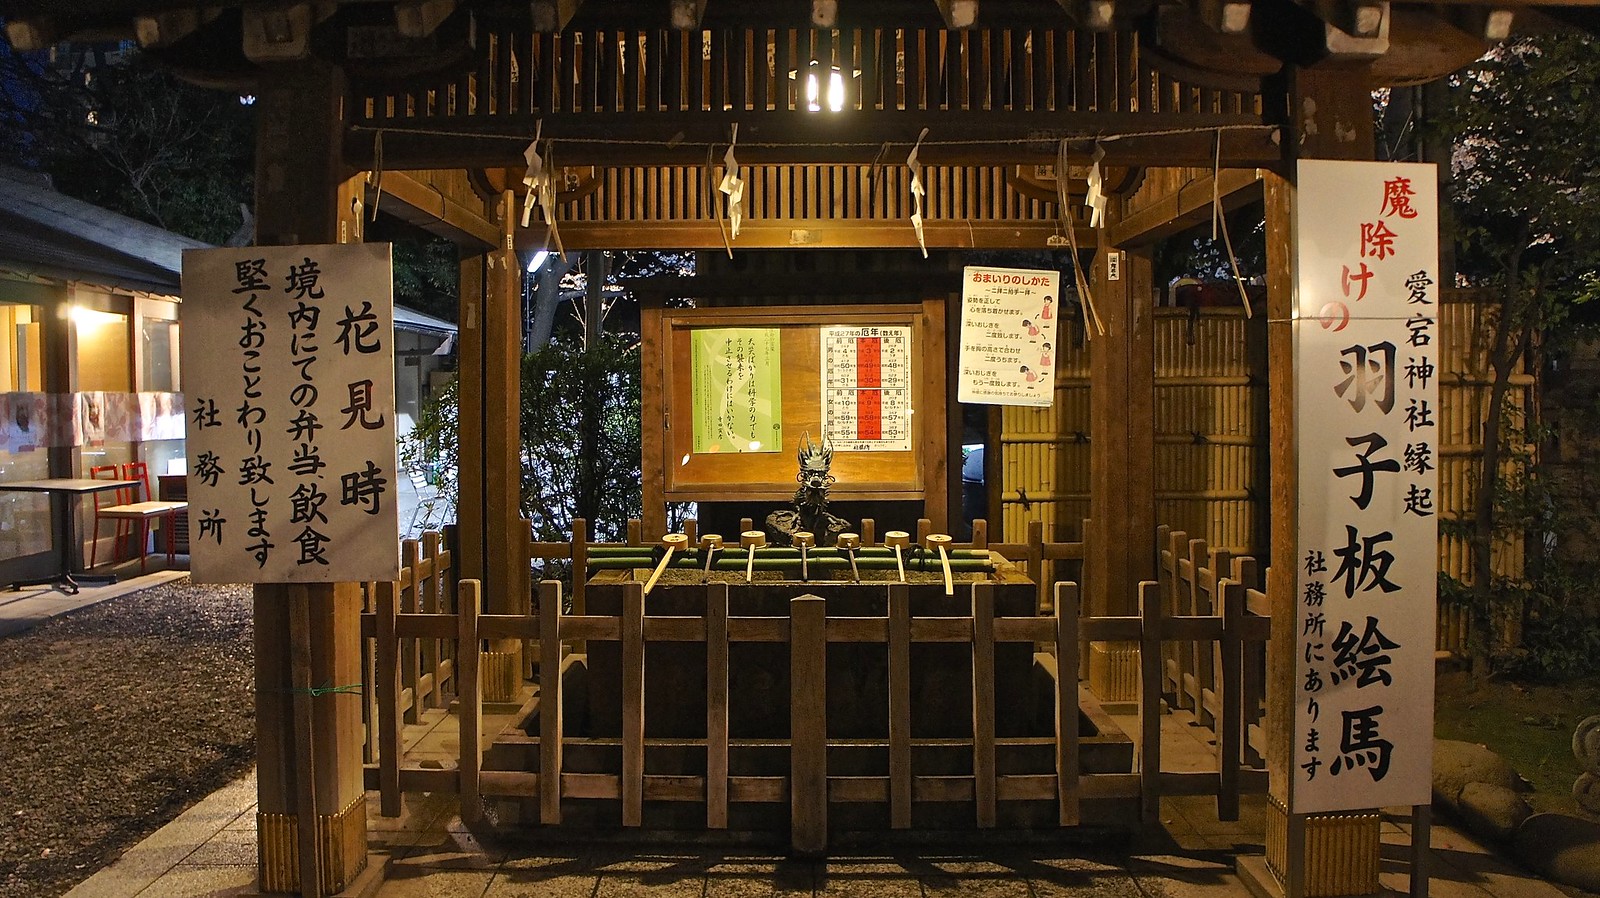 Water Station to wash hands at Atago Shrine